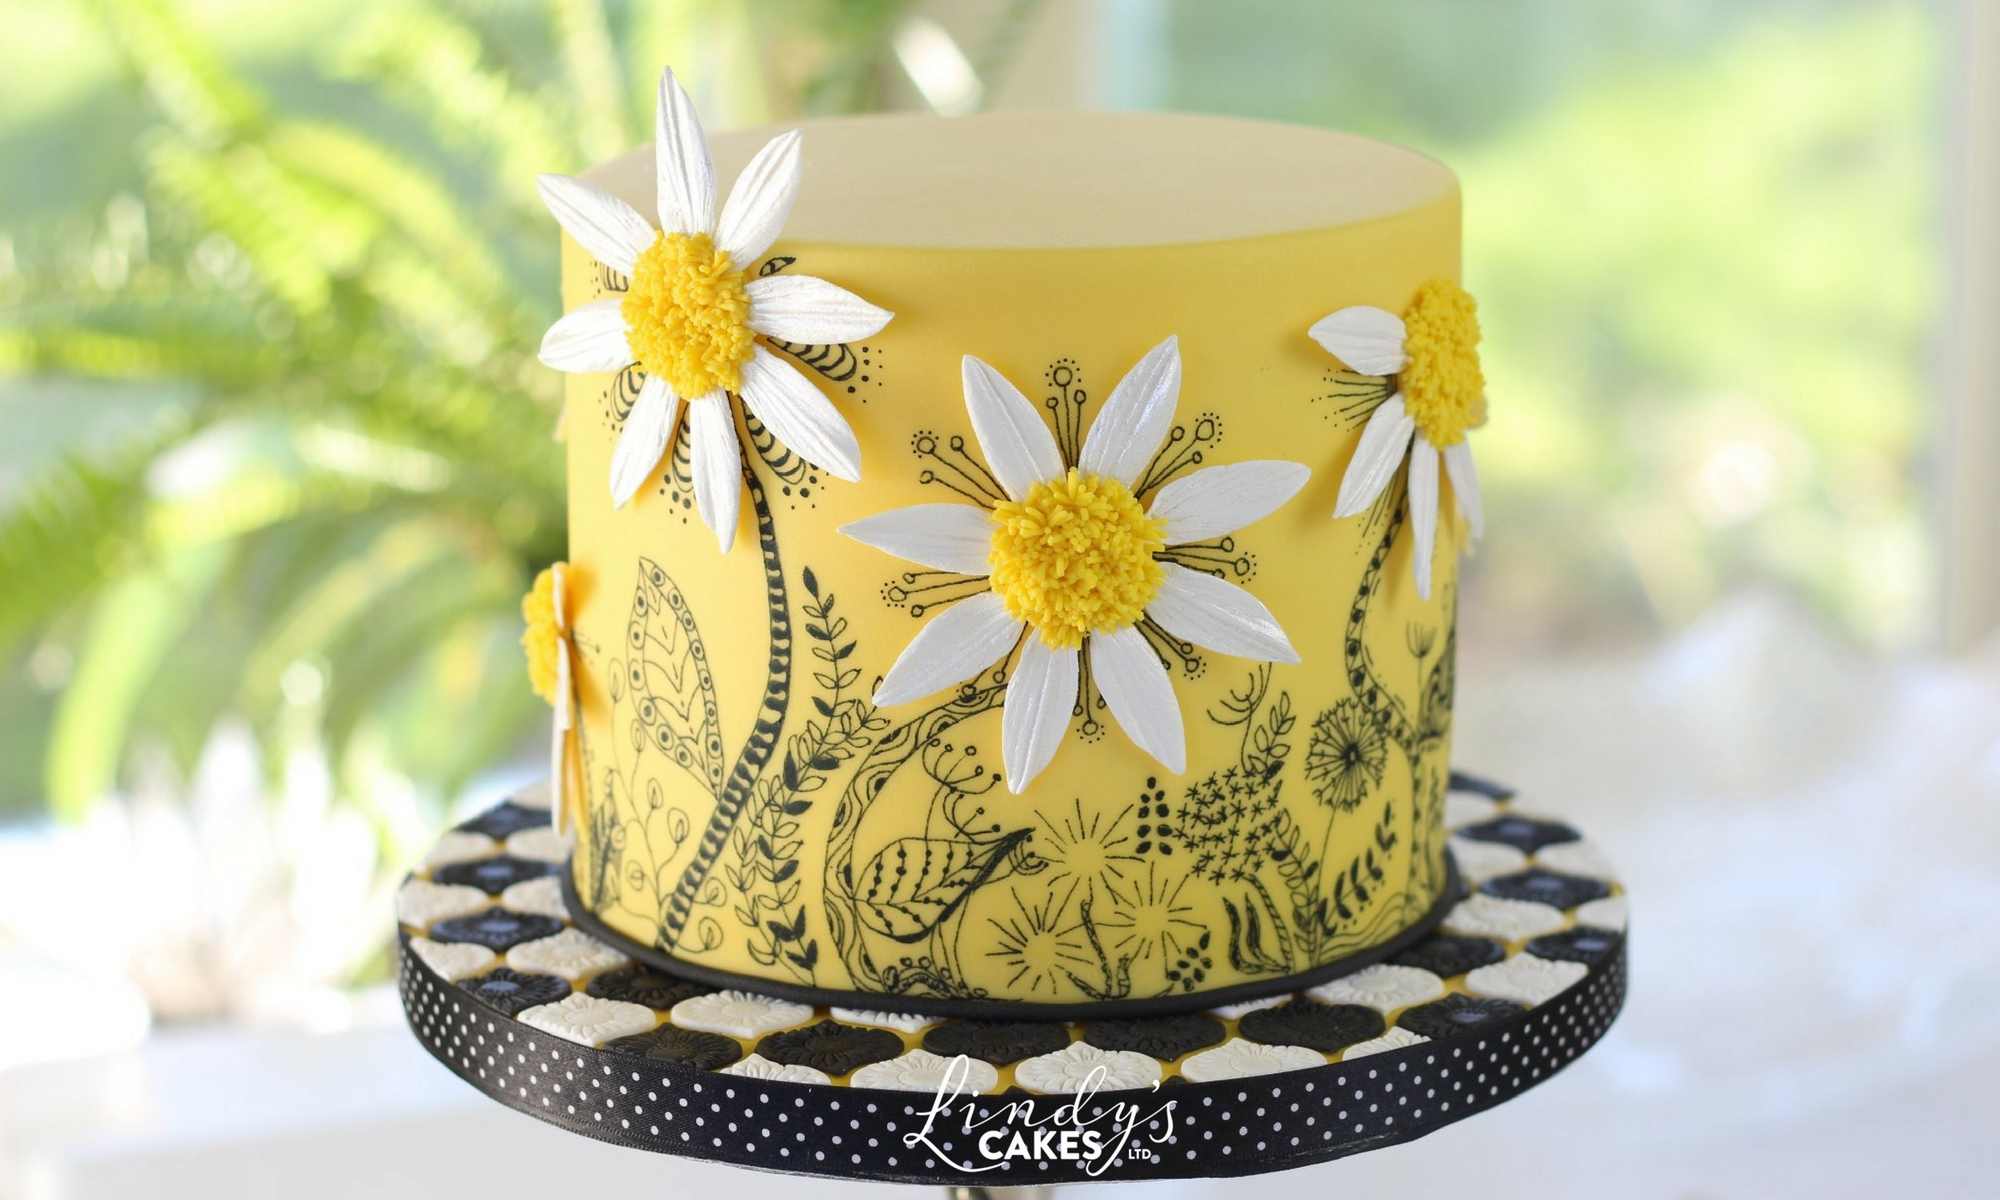 One of Lindy's lovely doodle cake decorating ideas - doodle daisies